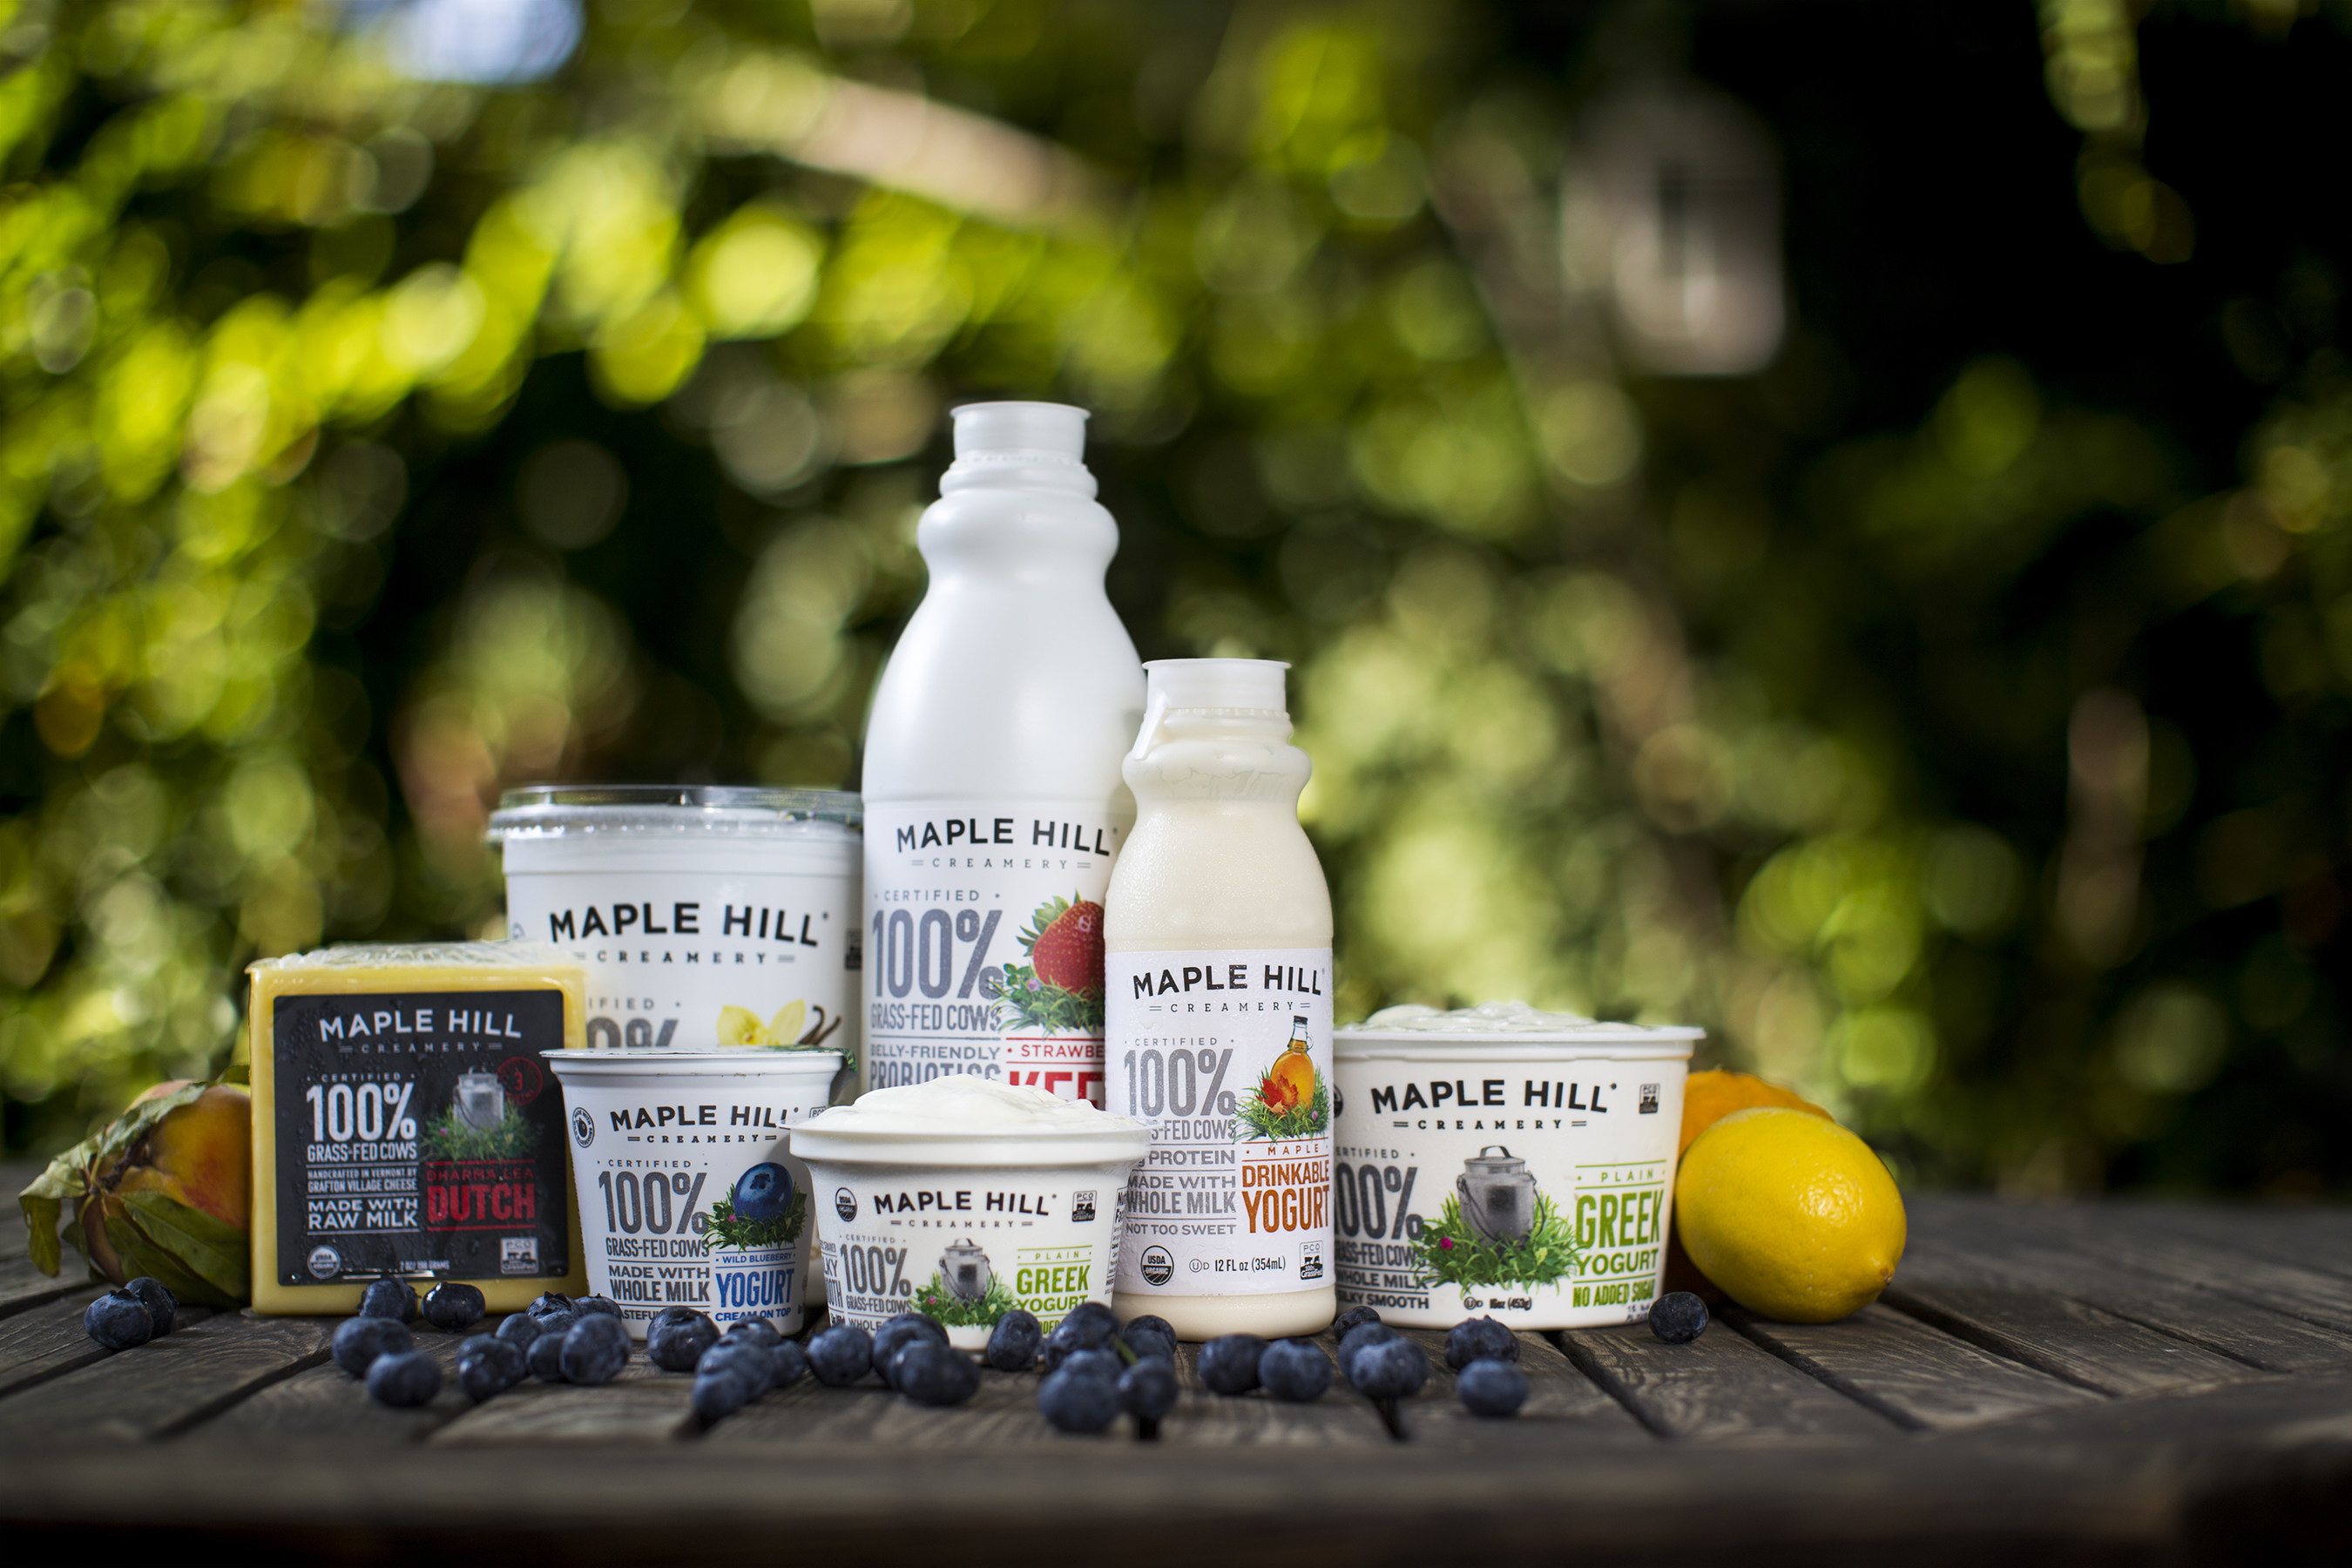 Maple Hill Creamery debuts new logo and product packaging that elevates their 100% Grass-Fed Dairy messaging